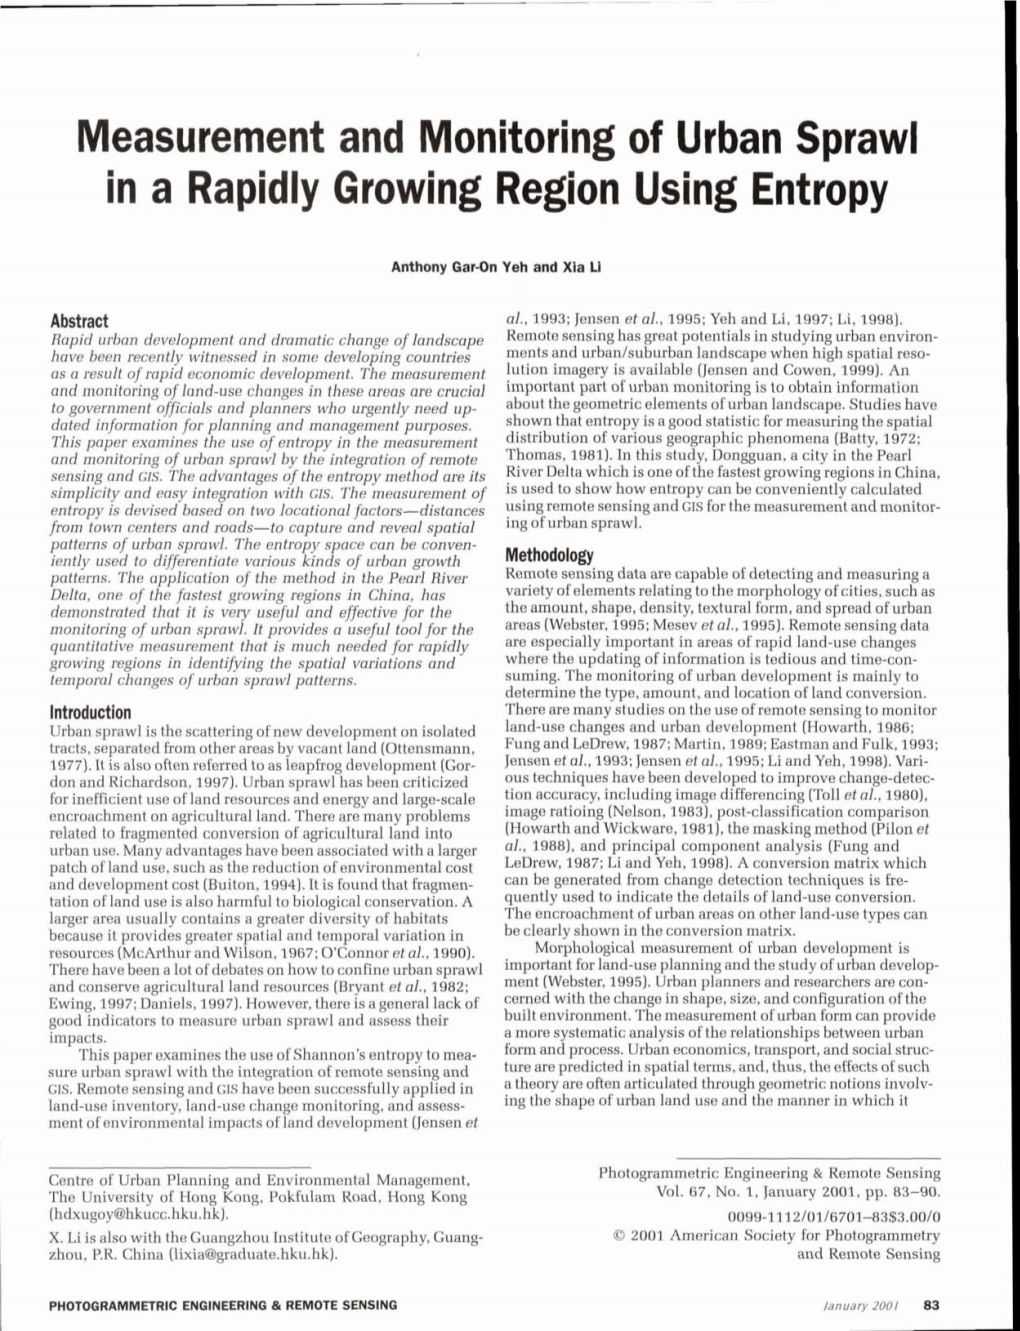 Measurement and Monitoring of Urban Sprawl in a Rapidly Growing Region Using Entropy